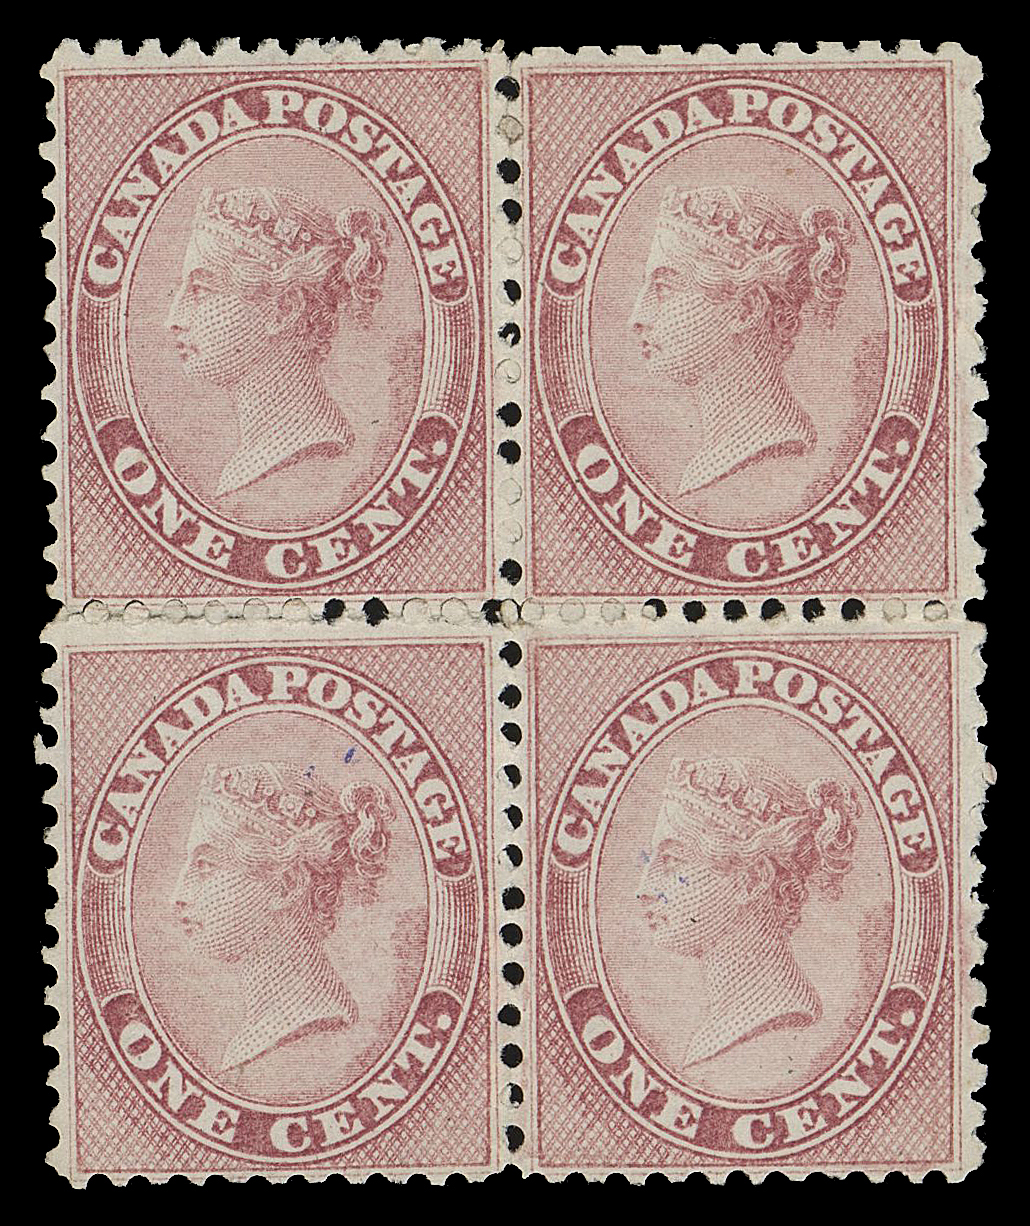 HALF PENNY AND ONE CENT  14b, ii,An unusually well centered unused block with bright colour on fresh paper (0.004" thick), couple minute ink specks on lower right stamp and a few split perfs, a very scarce, well centered multiple of the elusive thick paper, VF

Provenance: Gerald Wellburn, Robson Lowe, Toronto, November 1983; Lot 34
Sam Nickle, Christie